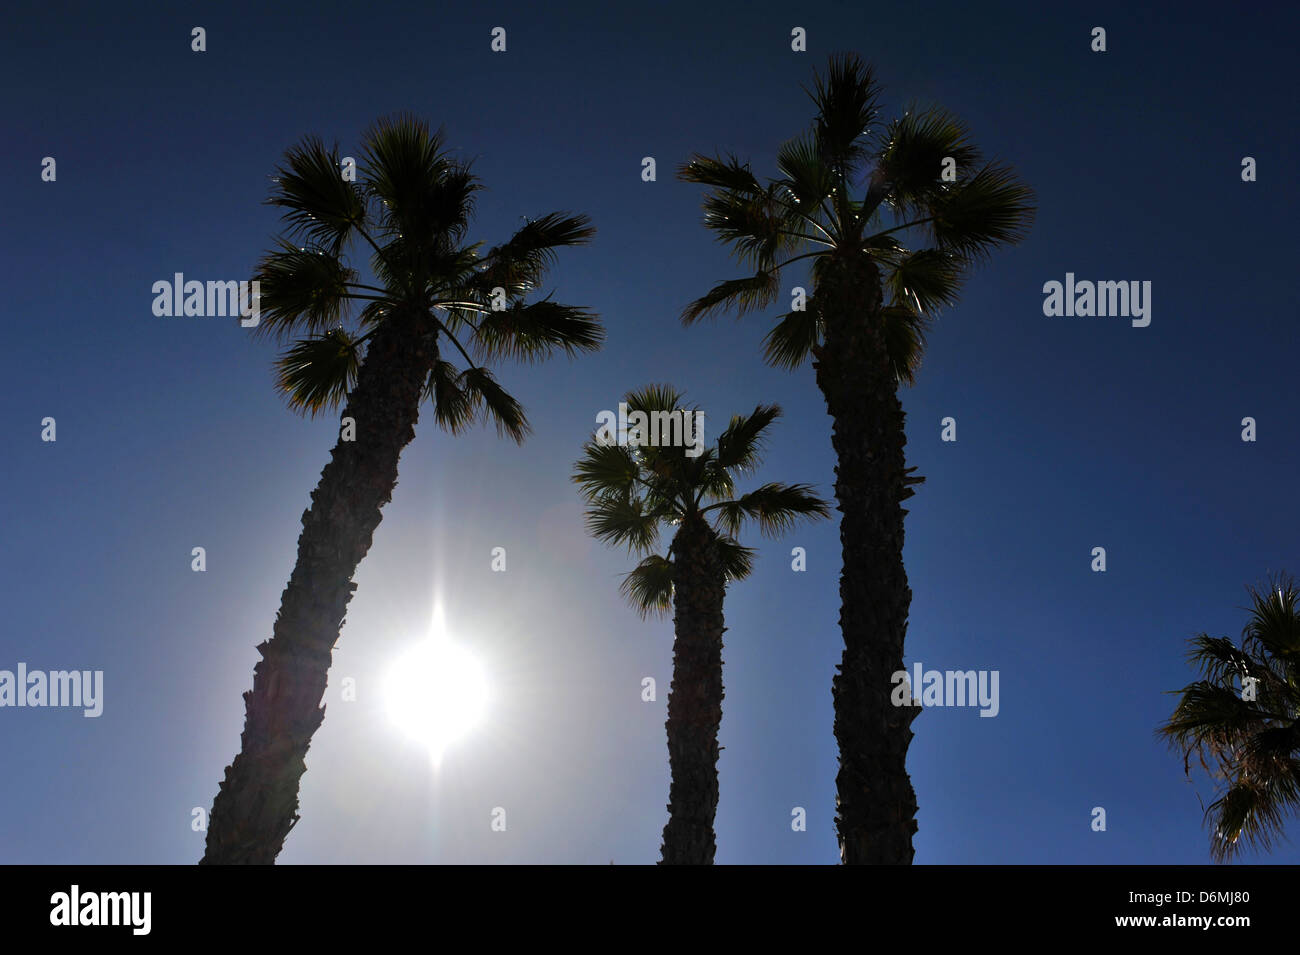 A silhouette of palm trees with a blue sky behind. Photograph taken ...